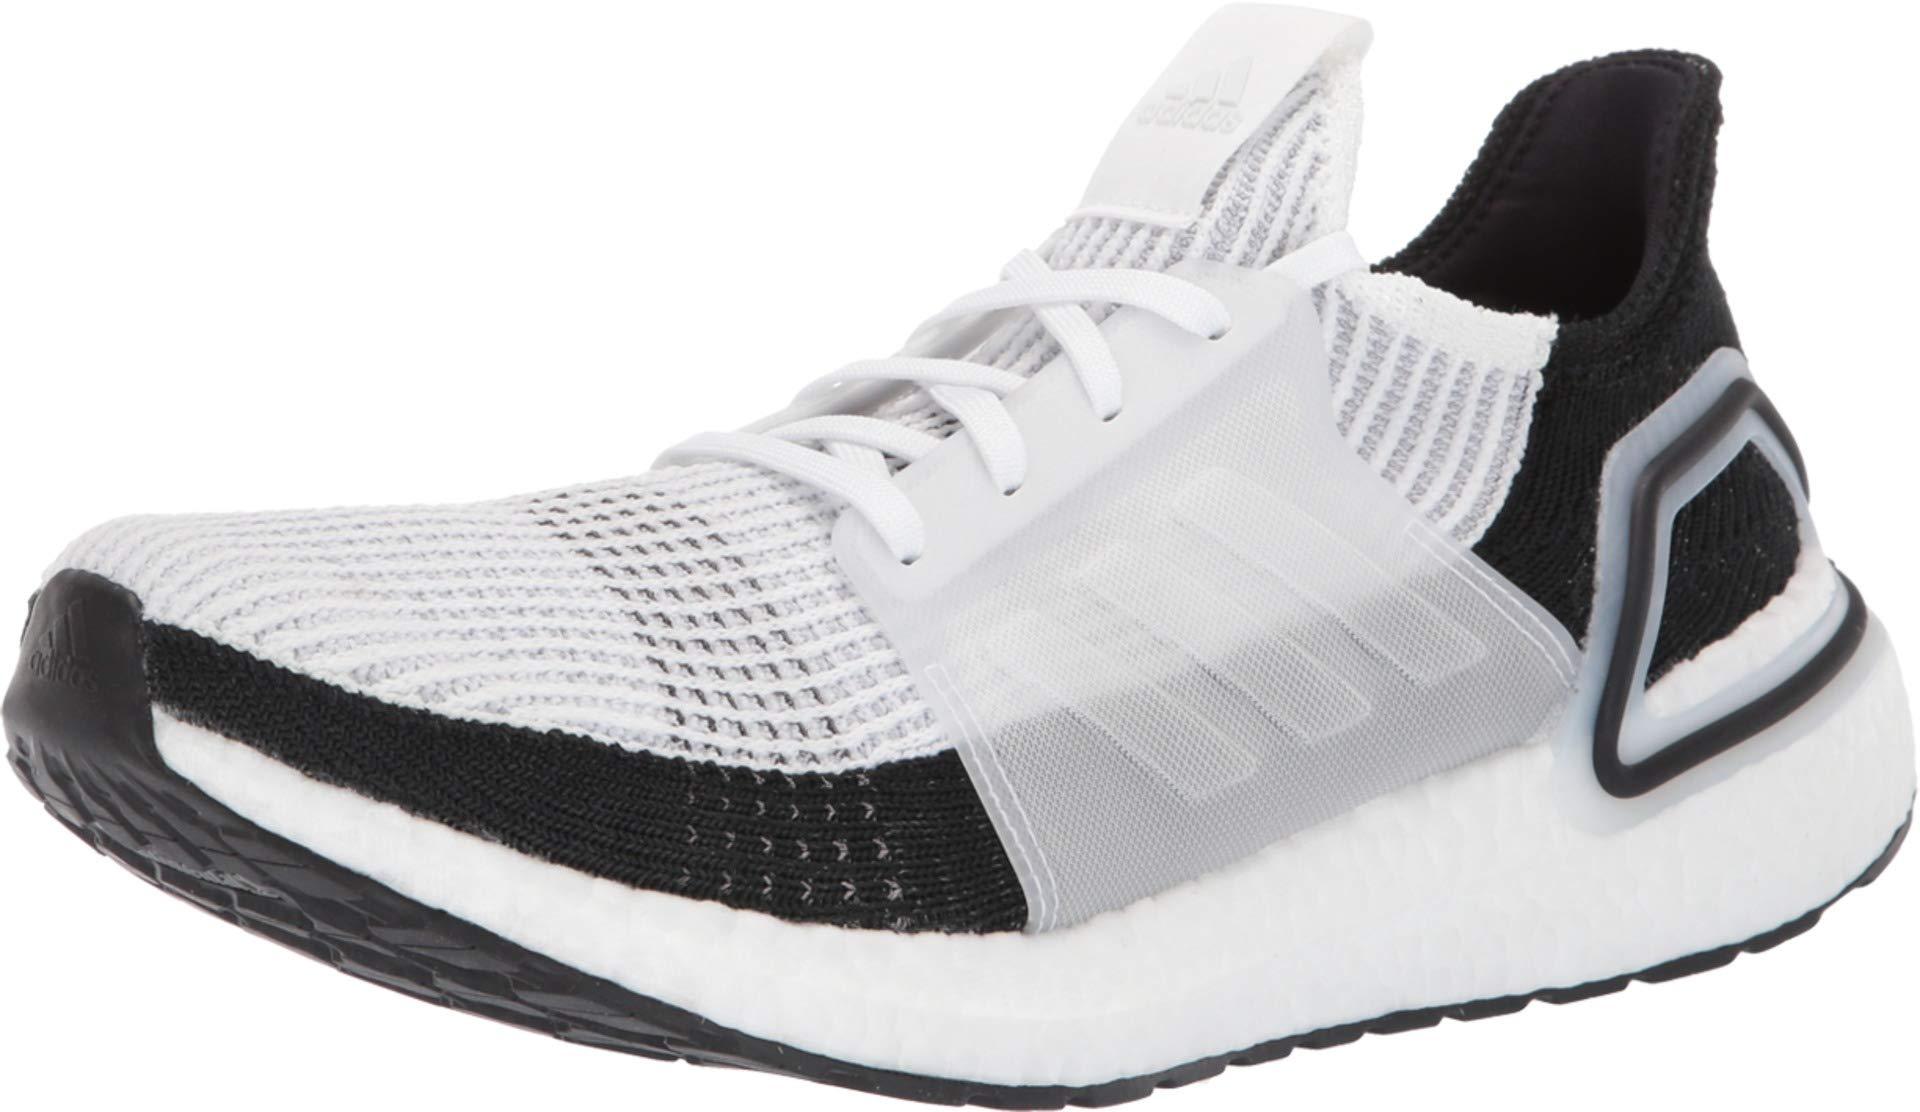 adidas Originals Synthetic Ultraboost 19 in White for Men - Lyst